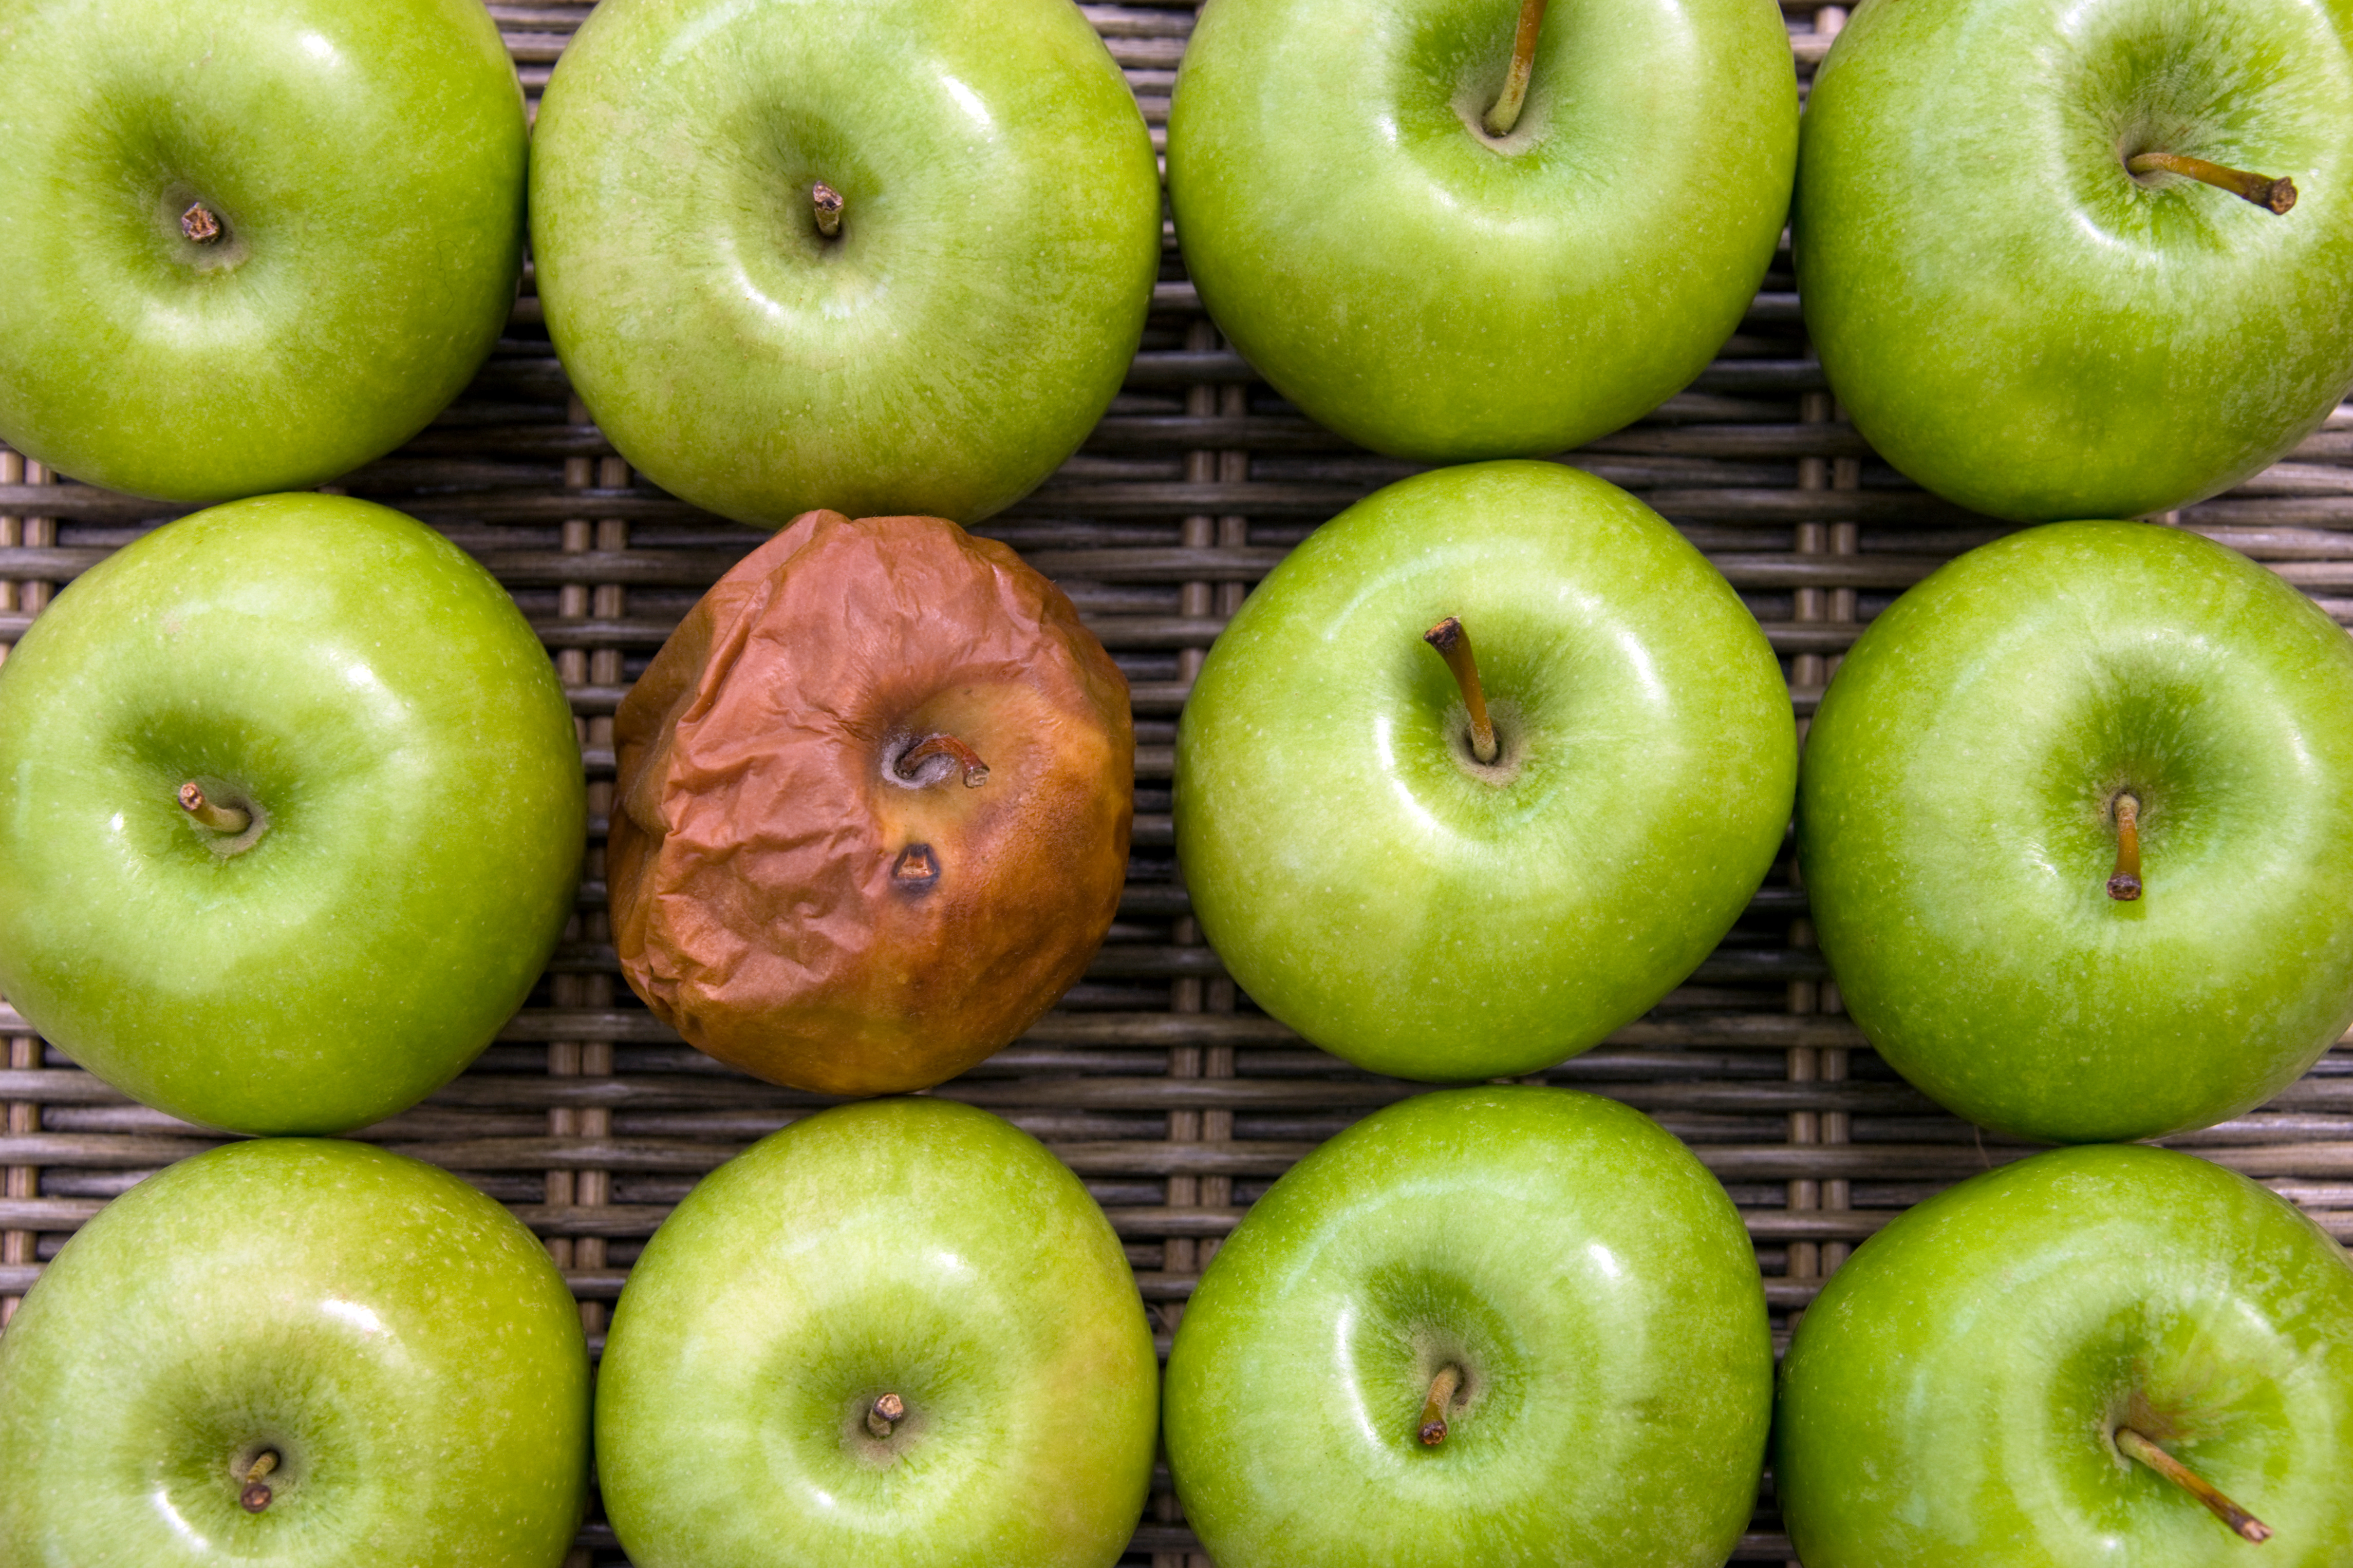 one bad apple in a bunch (implied food waste)